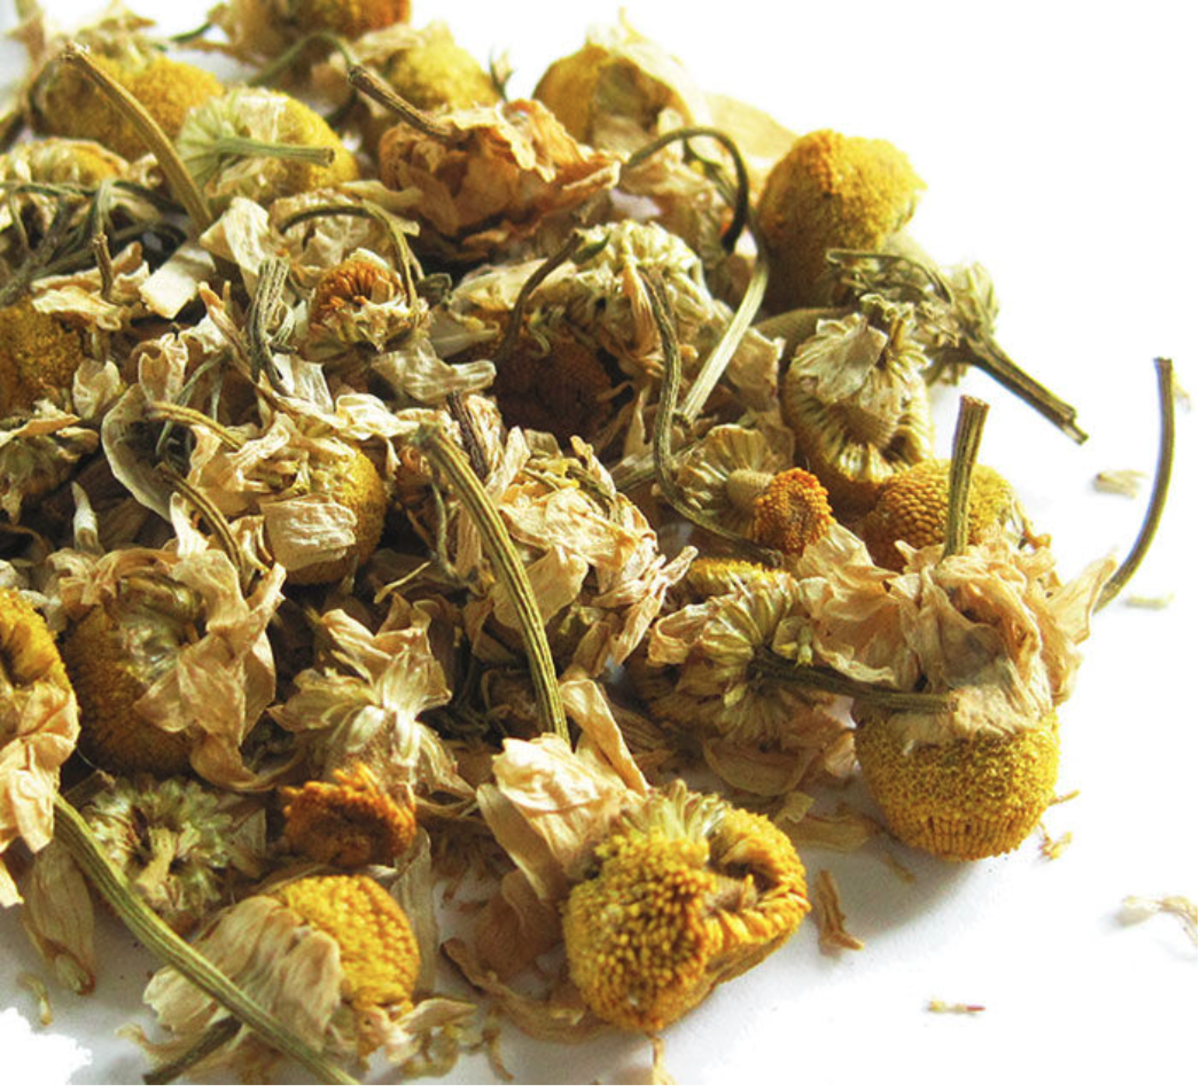 Chamomile tea comes for the dried flower heads of the chamomile plant.